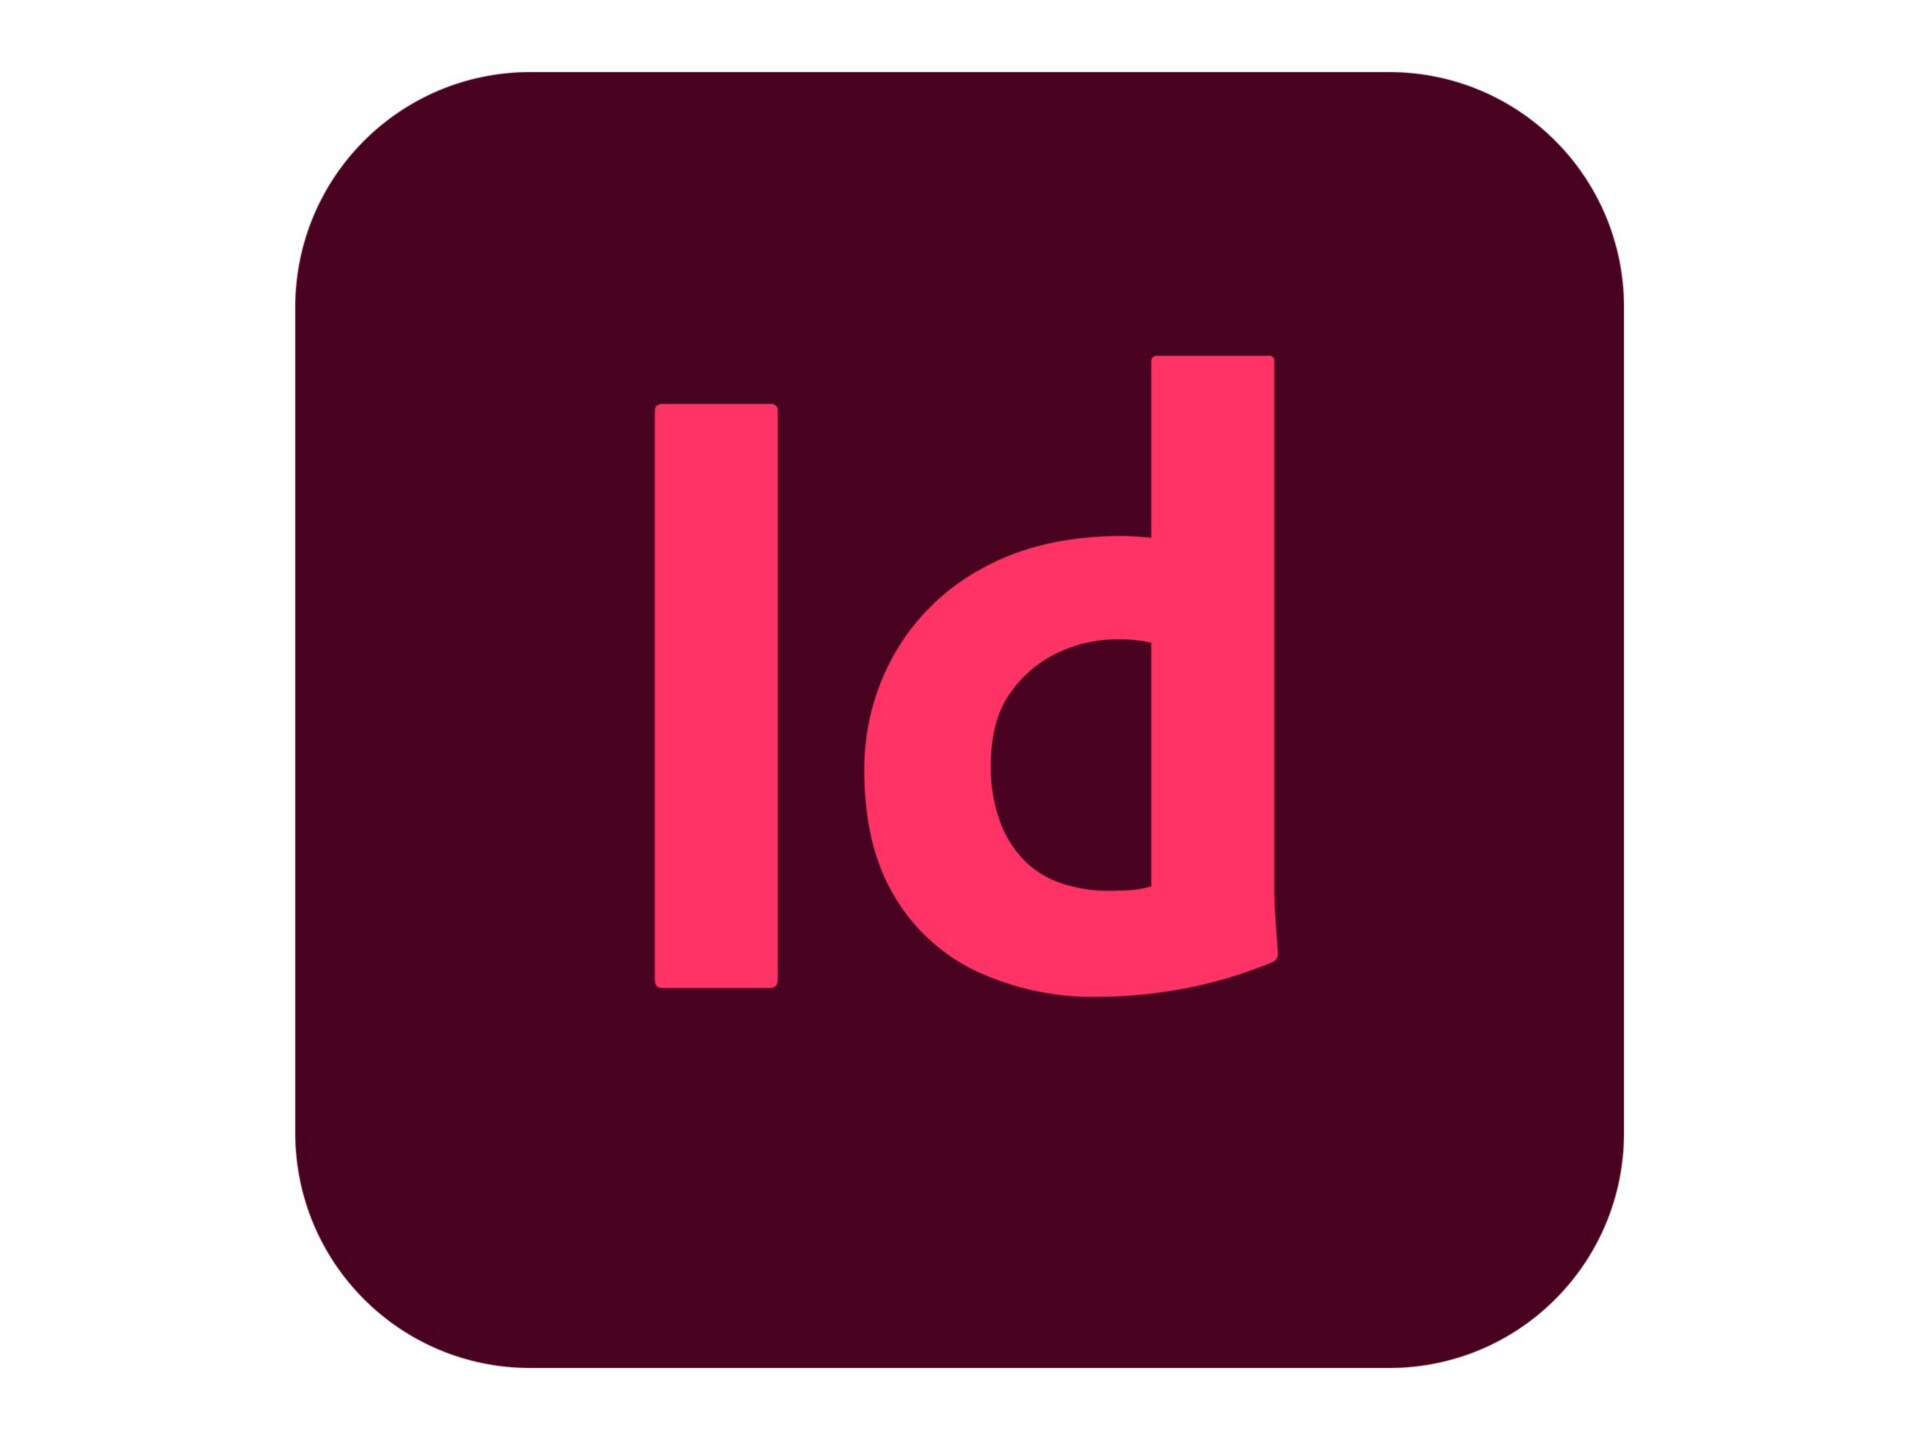 Adobe InDesign Pro for teams - Subscription New (annual) - 1 user